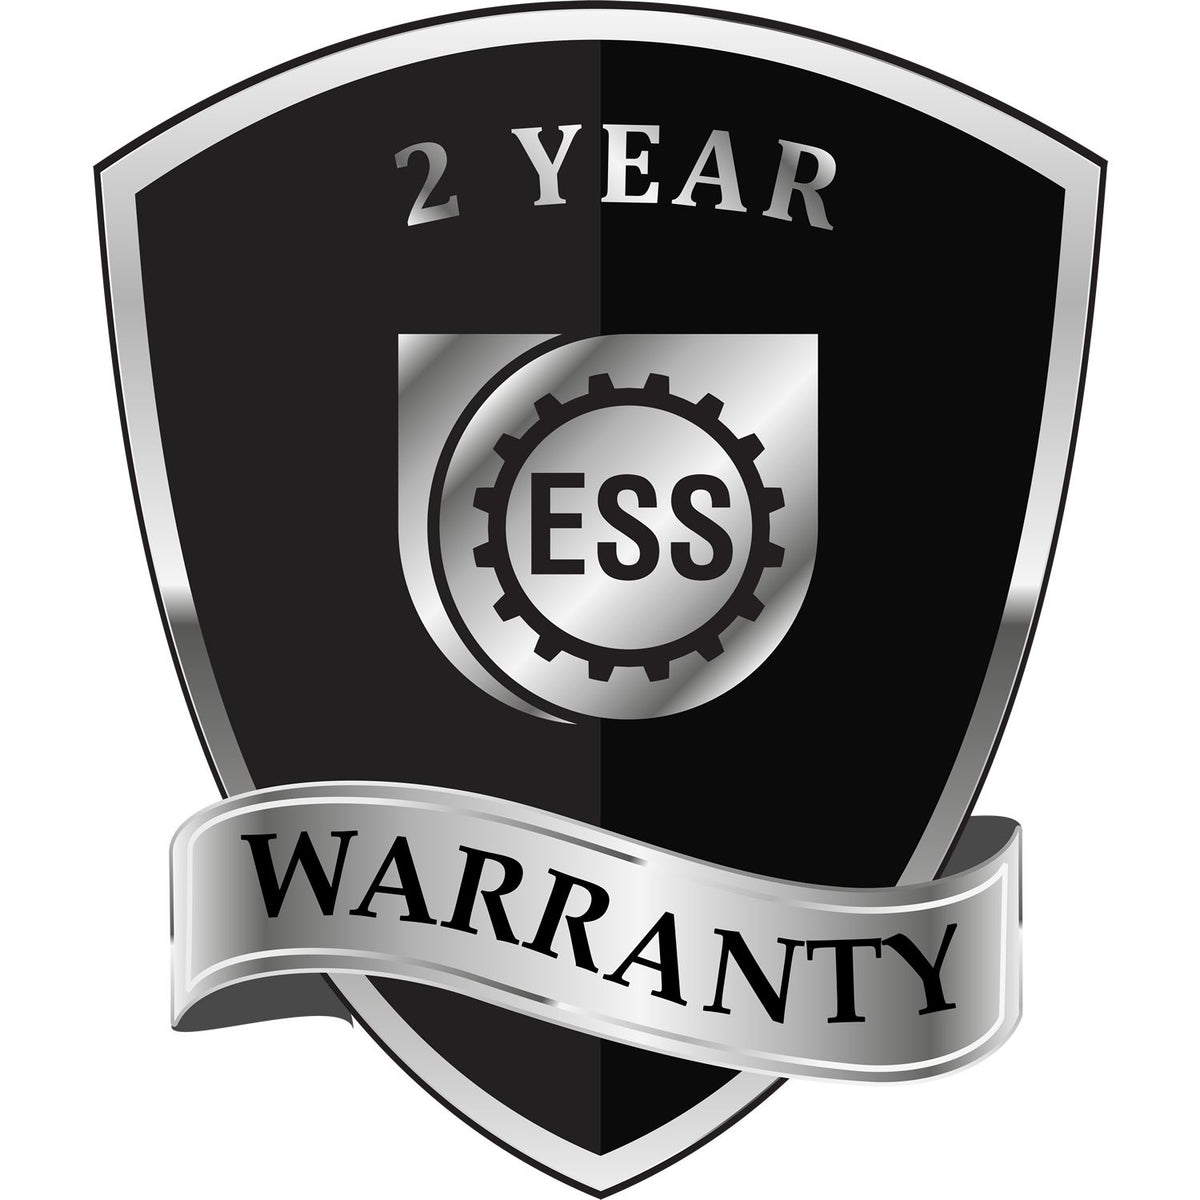 A badge or emblem showing a warranty icon for the Long Reach North Carolina PE Seal